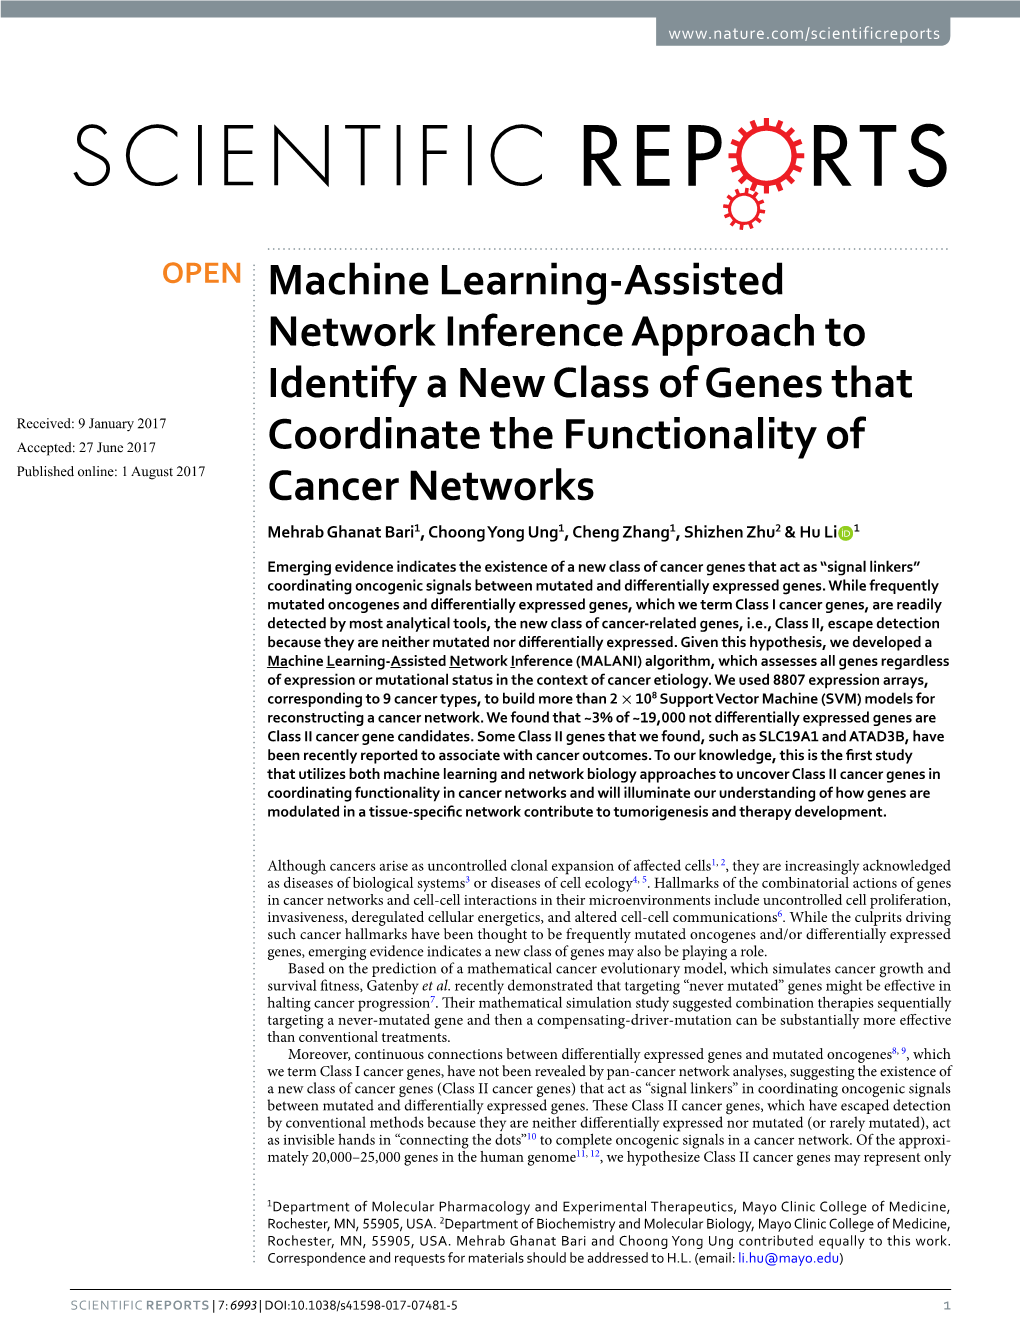 Machine Learning-Assisted Network Inference Approach to Identify A